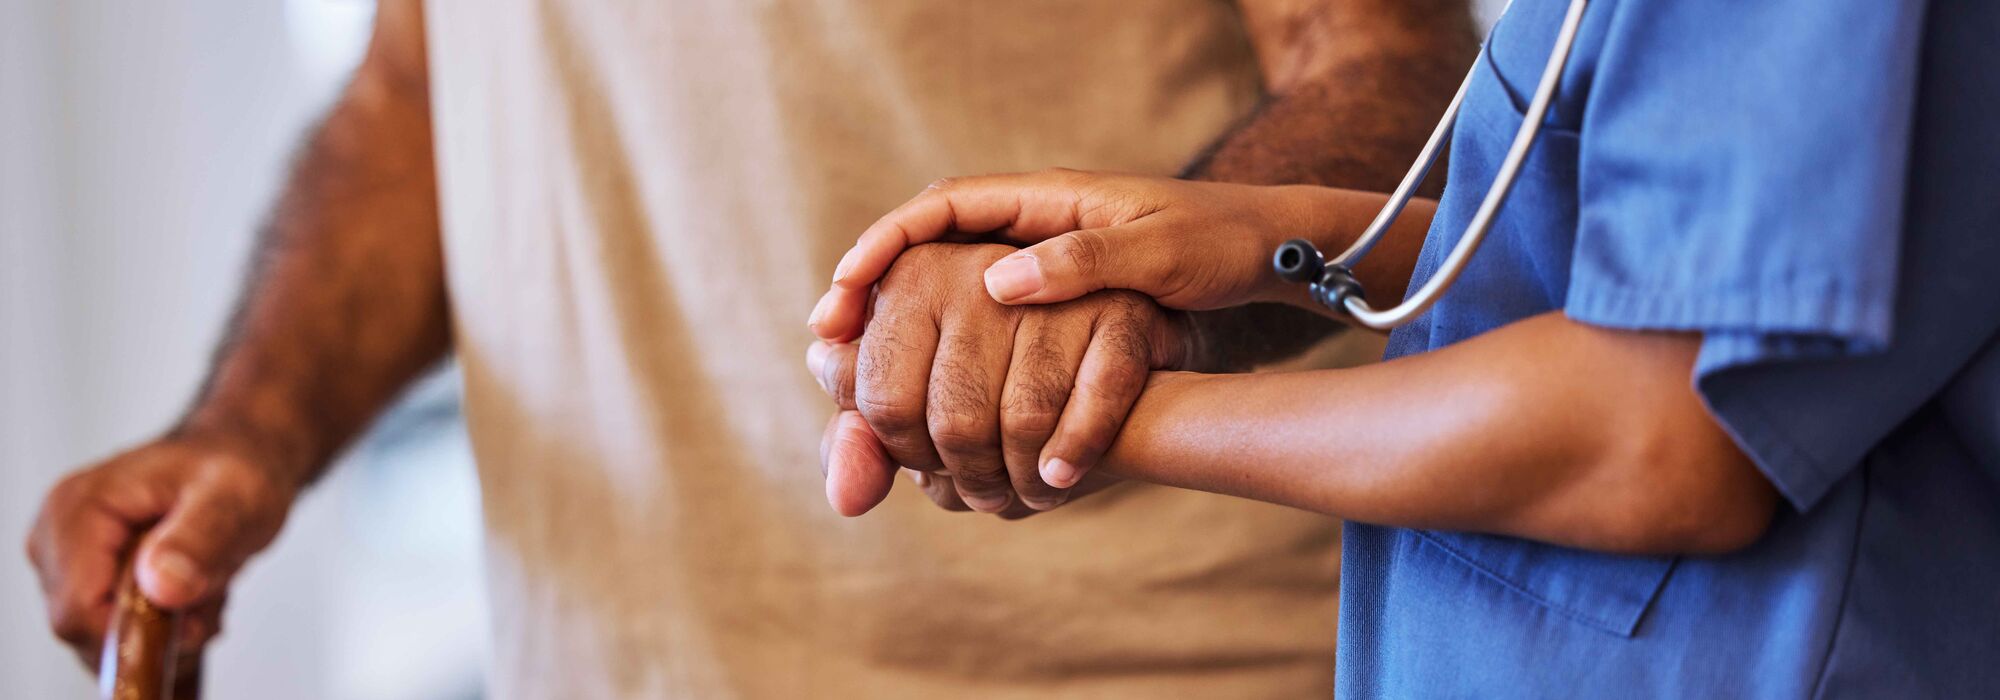 healthcare provider holding the hand of a patient